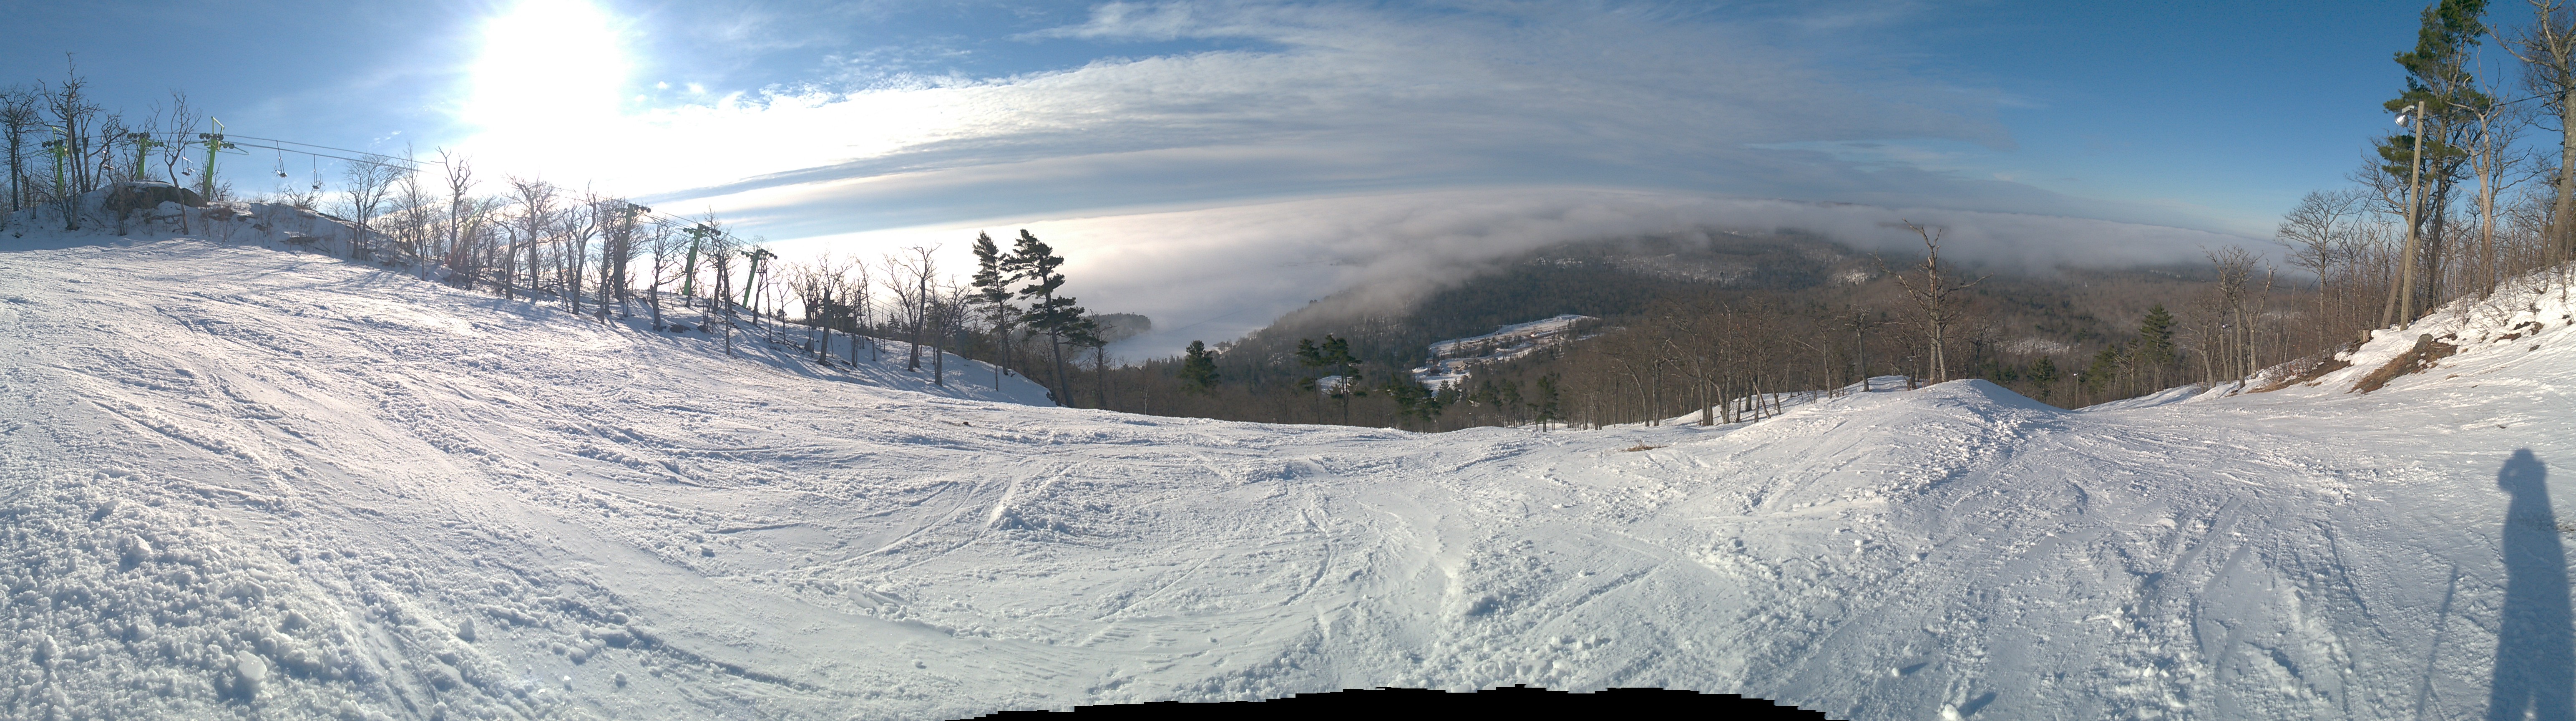 Panorama above the clouds, Mount Bohemia